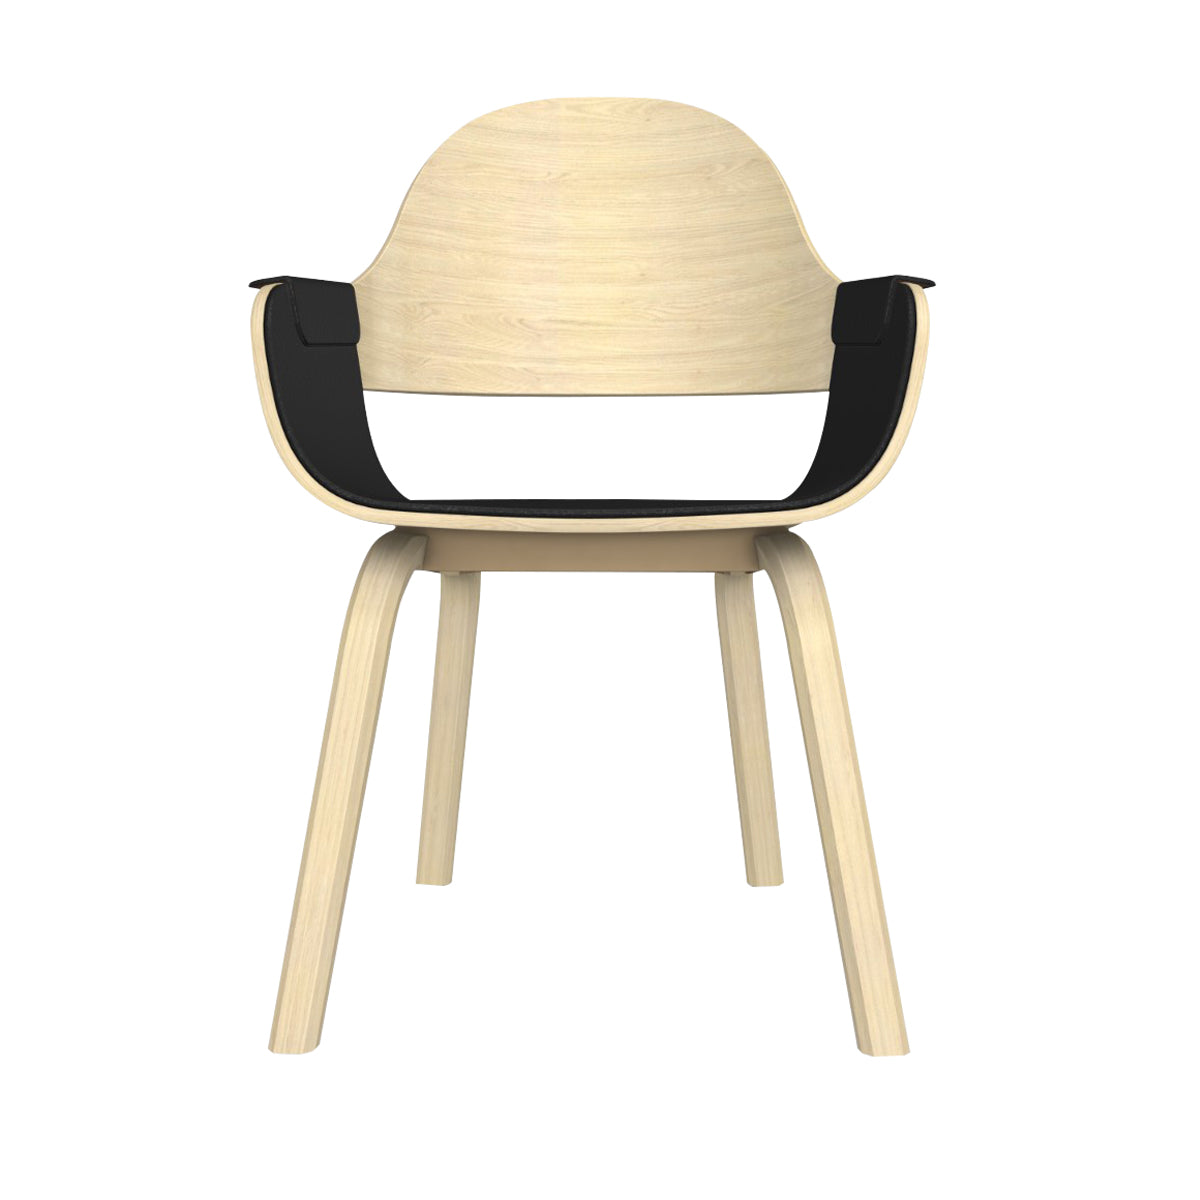 Showtime Nude Chair: Interior Seat + Armrest Upholstered + Natural Ash